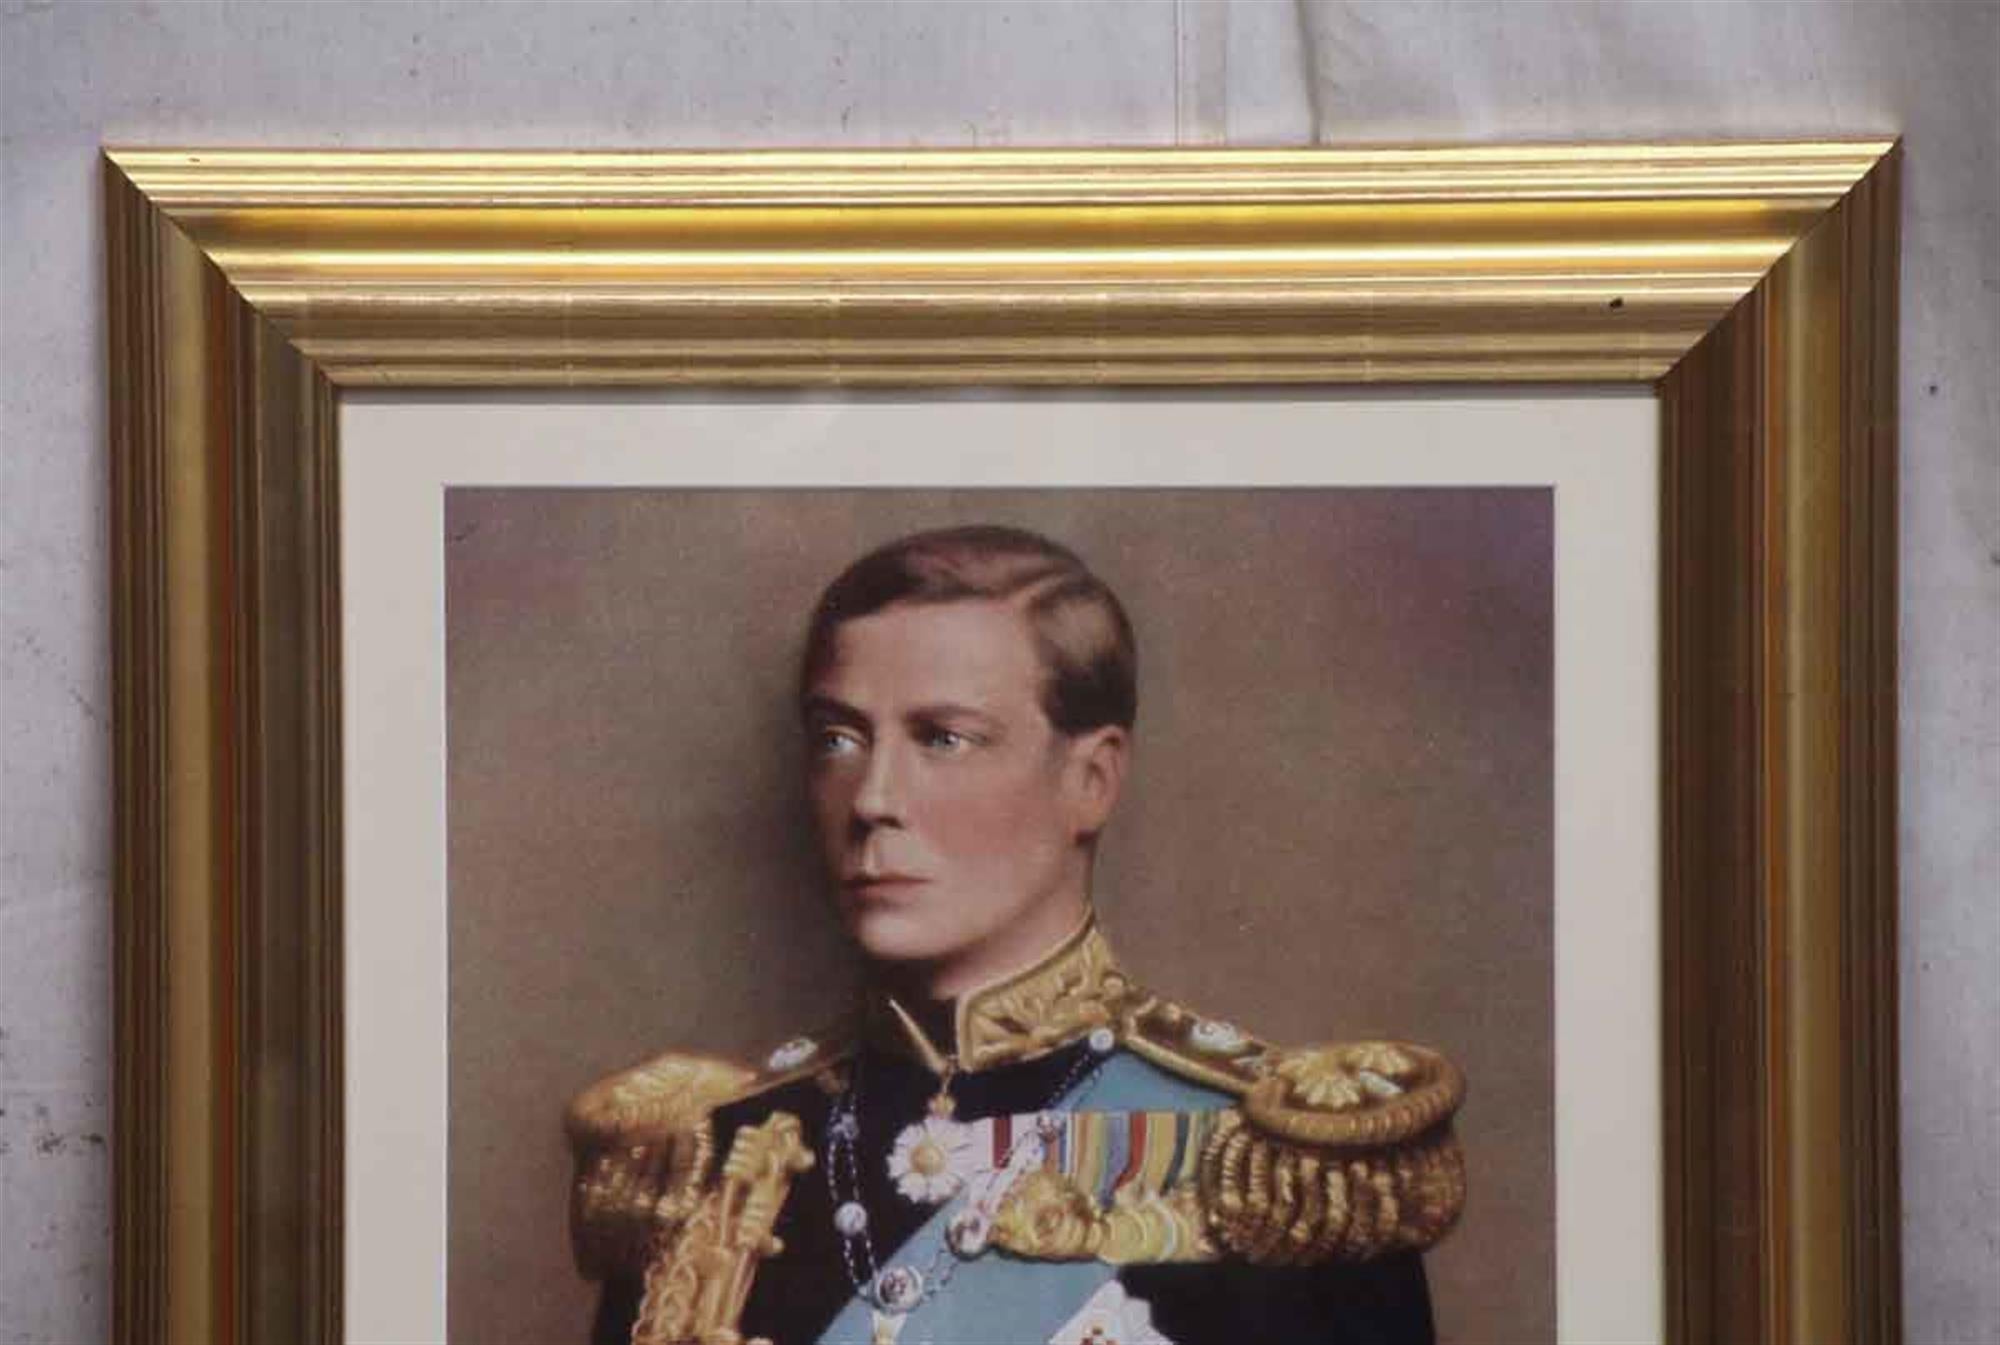 1980s wall mounted gold wooden framed print of The Duke of Windsor-Waldorf Towers Resident, circa 1940-1950. He is also known as Edward VIII. Edward was the eldest son of King George V and Queen Mary. Edward became king after his father's death in